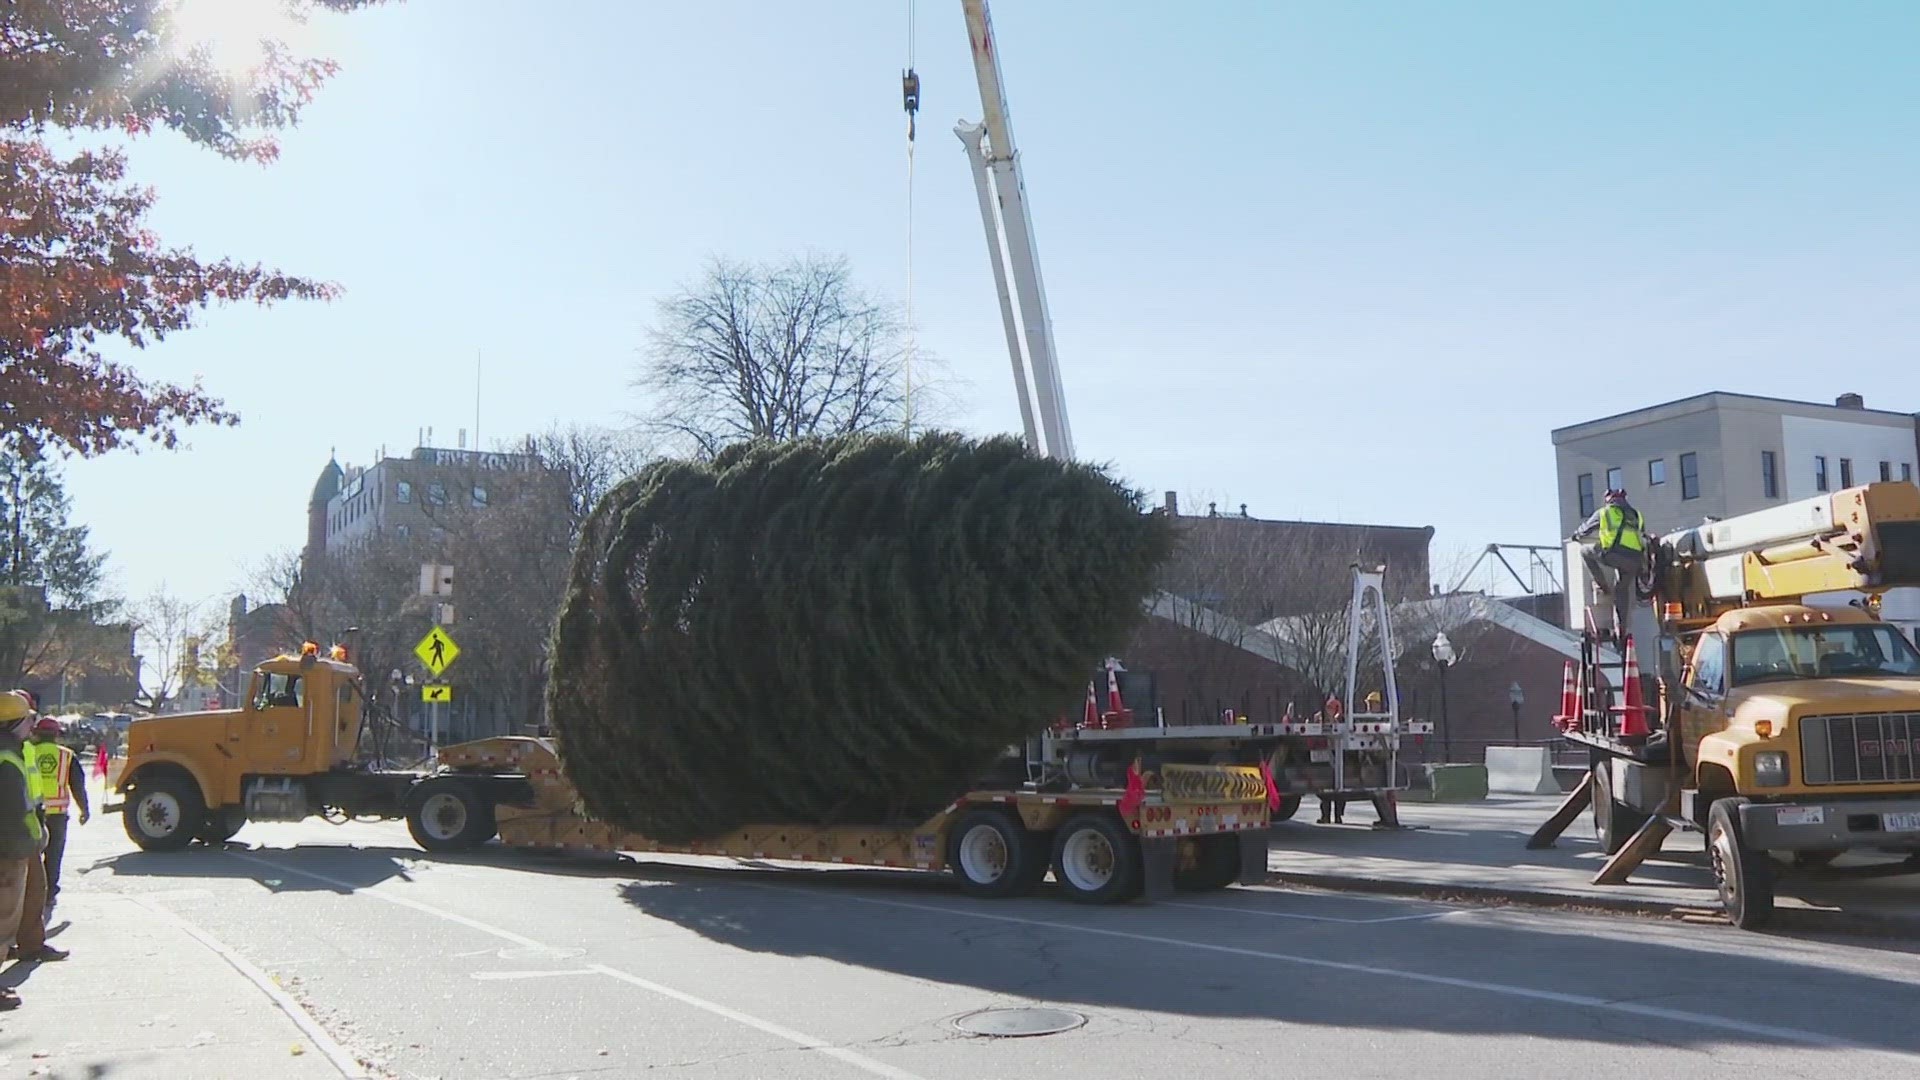 The 25-foot spruce will be decorated with lights prior to Lewiston’s Holiday at the Plaza event on Dec. 2.